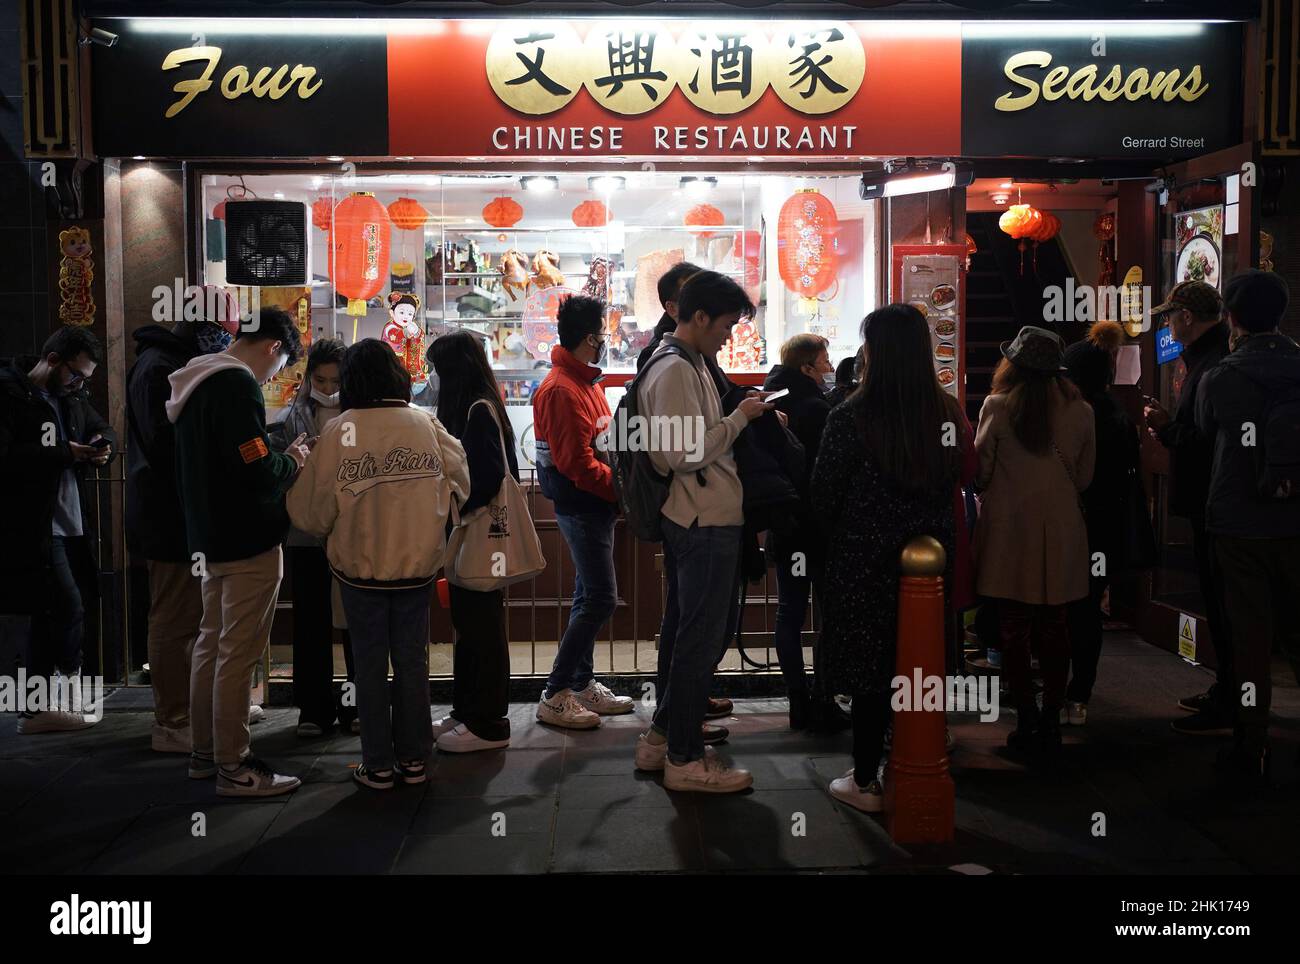 People queuing outside a restaurant in Chinatown, London, celebrating the Lunar New Year. The Lunar New Year - beginning on February 1 - is the start of a two-week celebration and is the most important holiday for millions of people around the world. Picture date: Tuesday February 1, 2022. Stock Photo